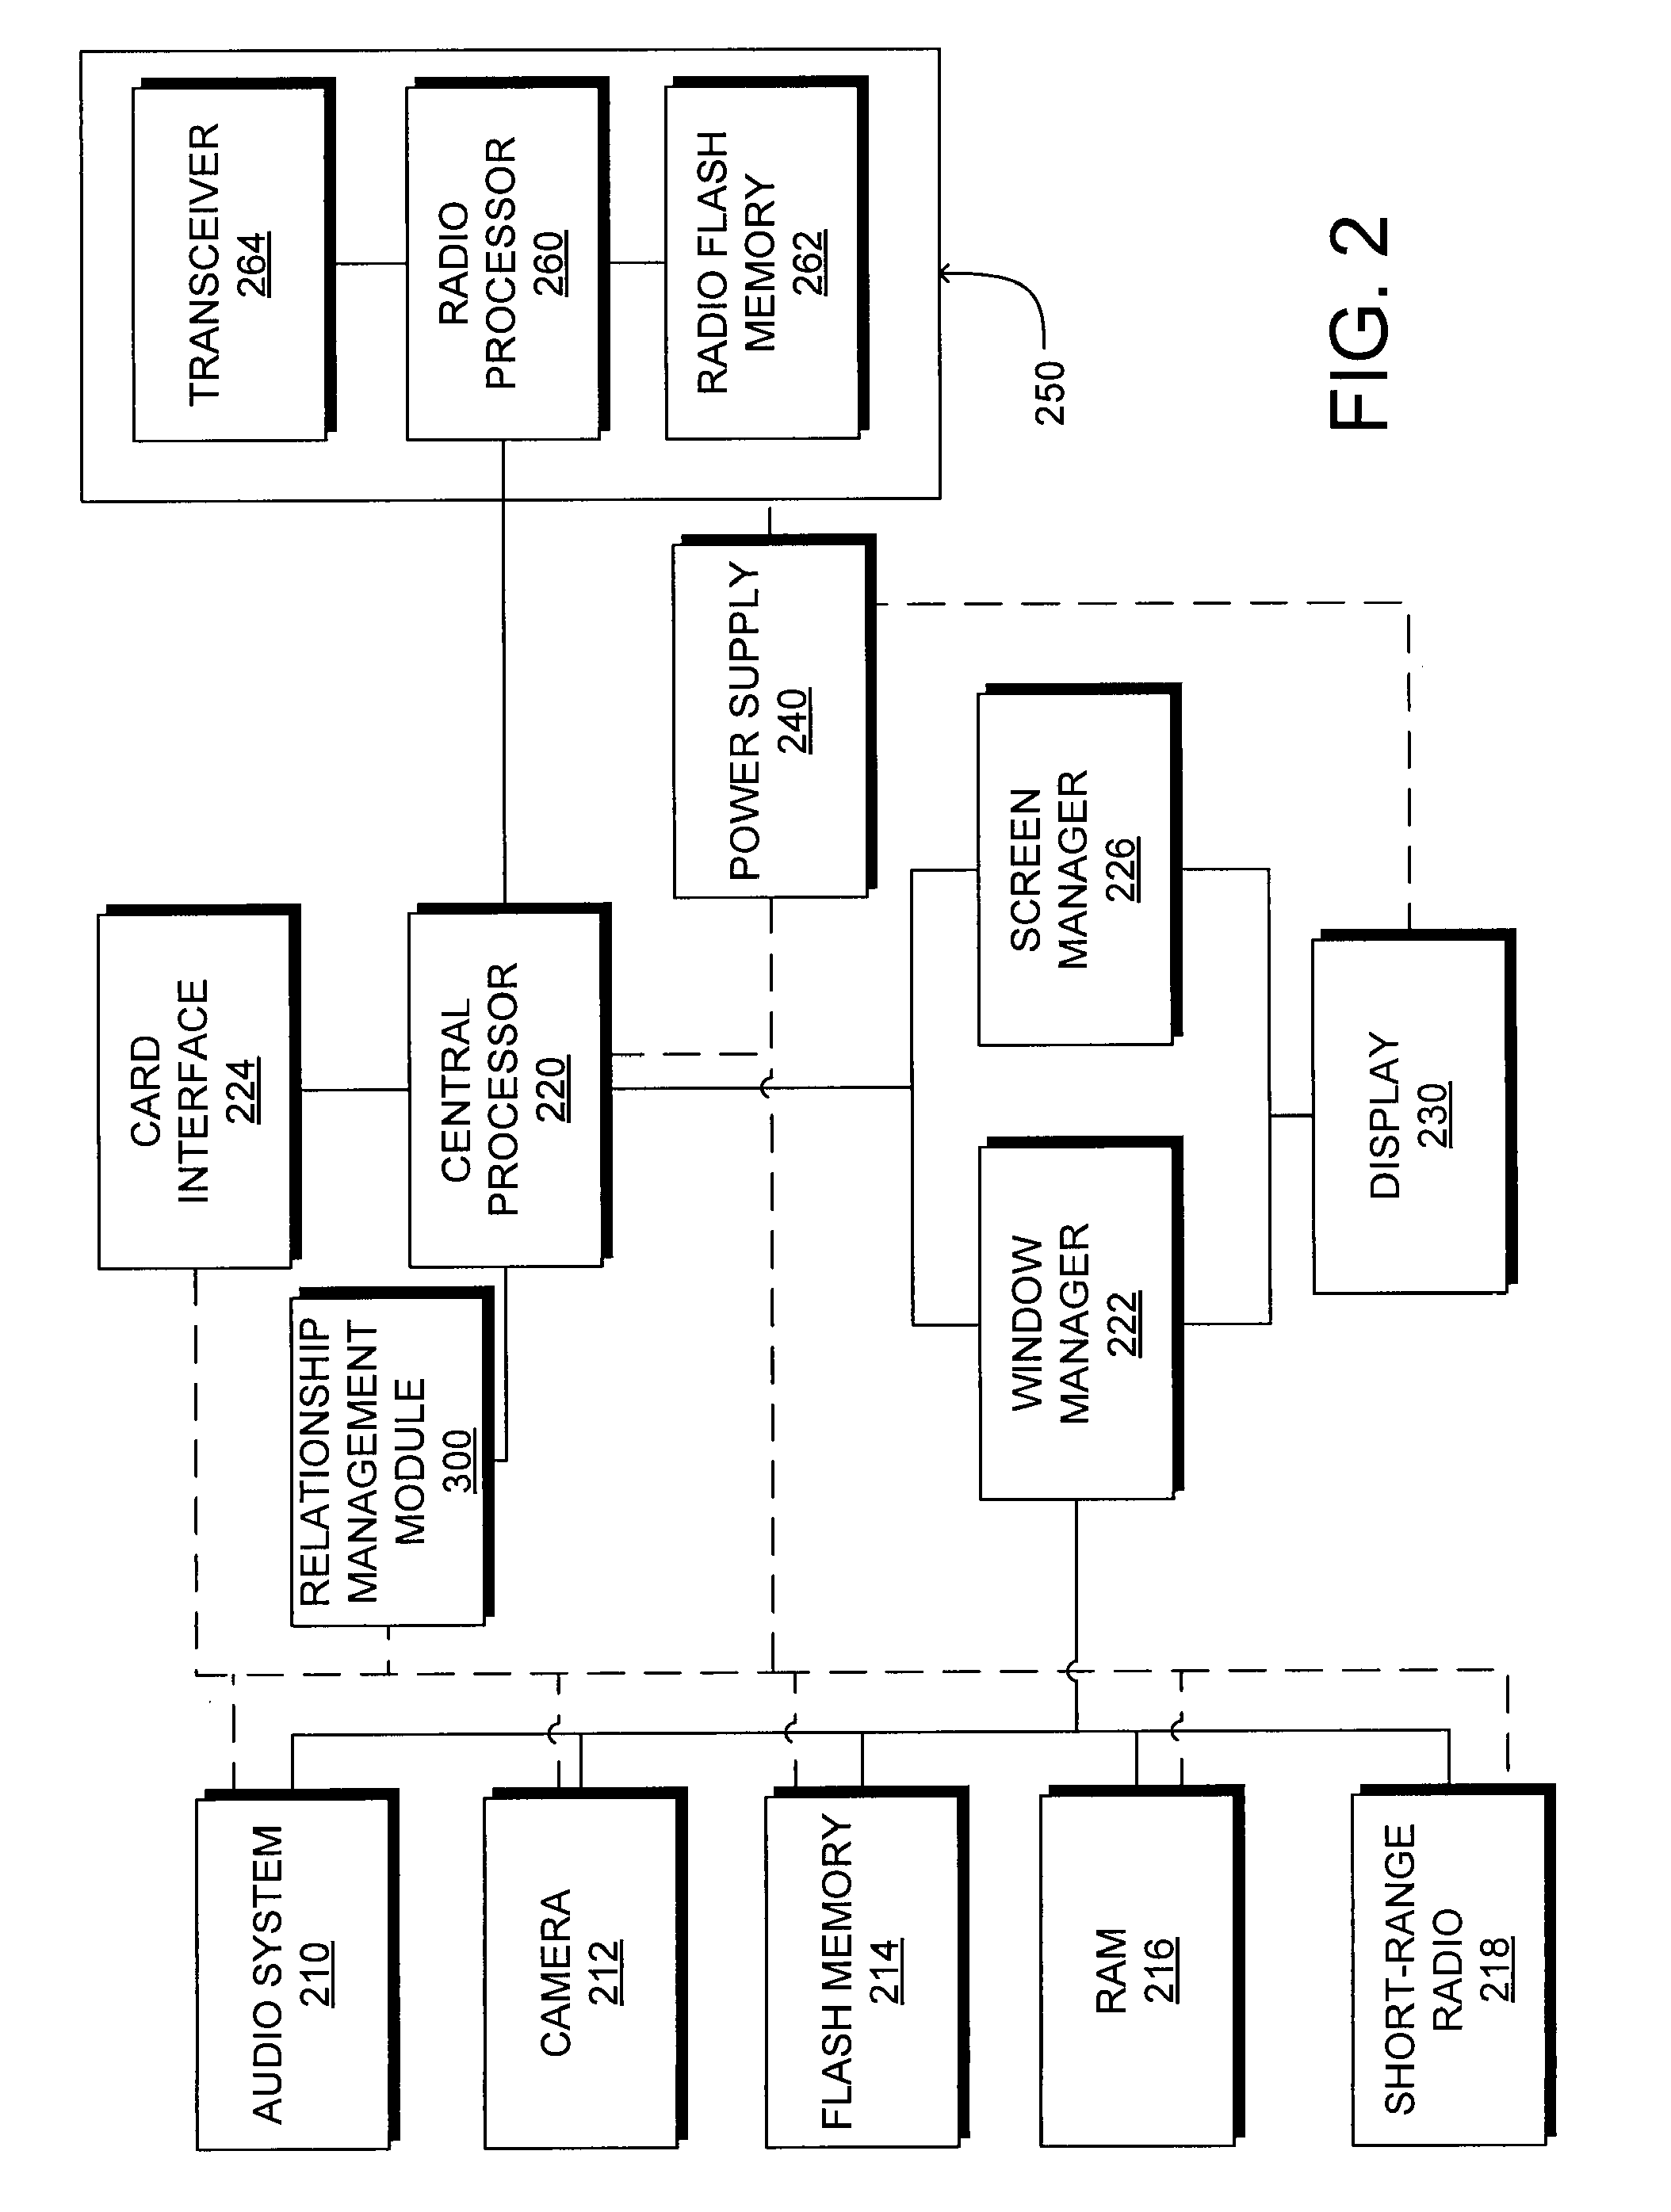 Relationship management on a mobile computing device